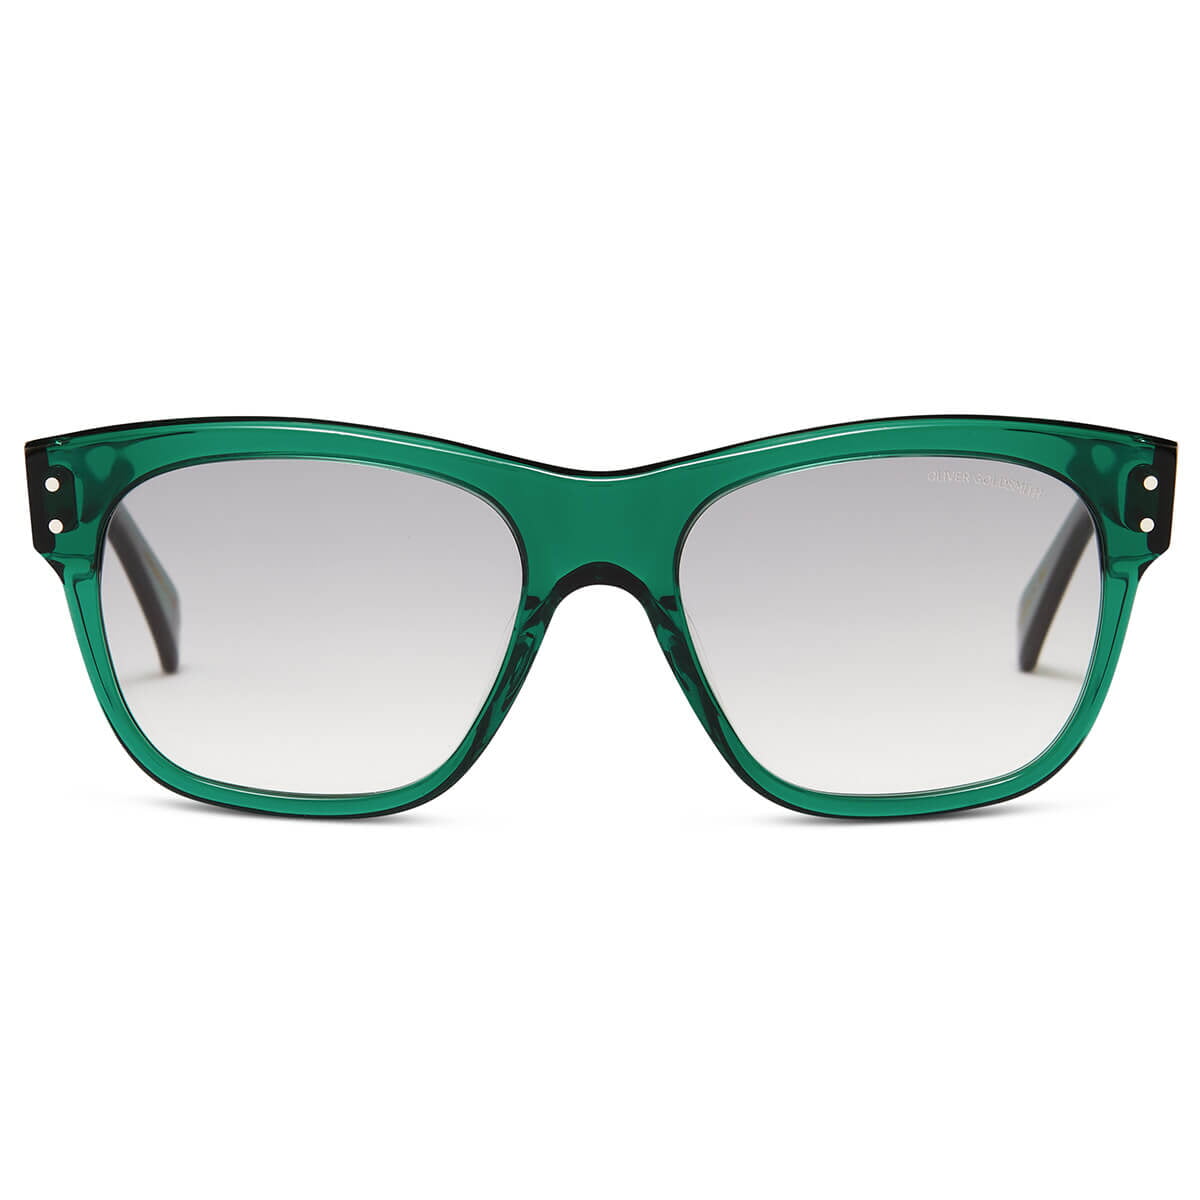 Lord WS Sunglasses with Emerald acetate frame